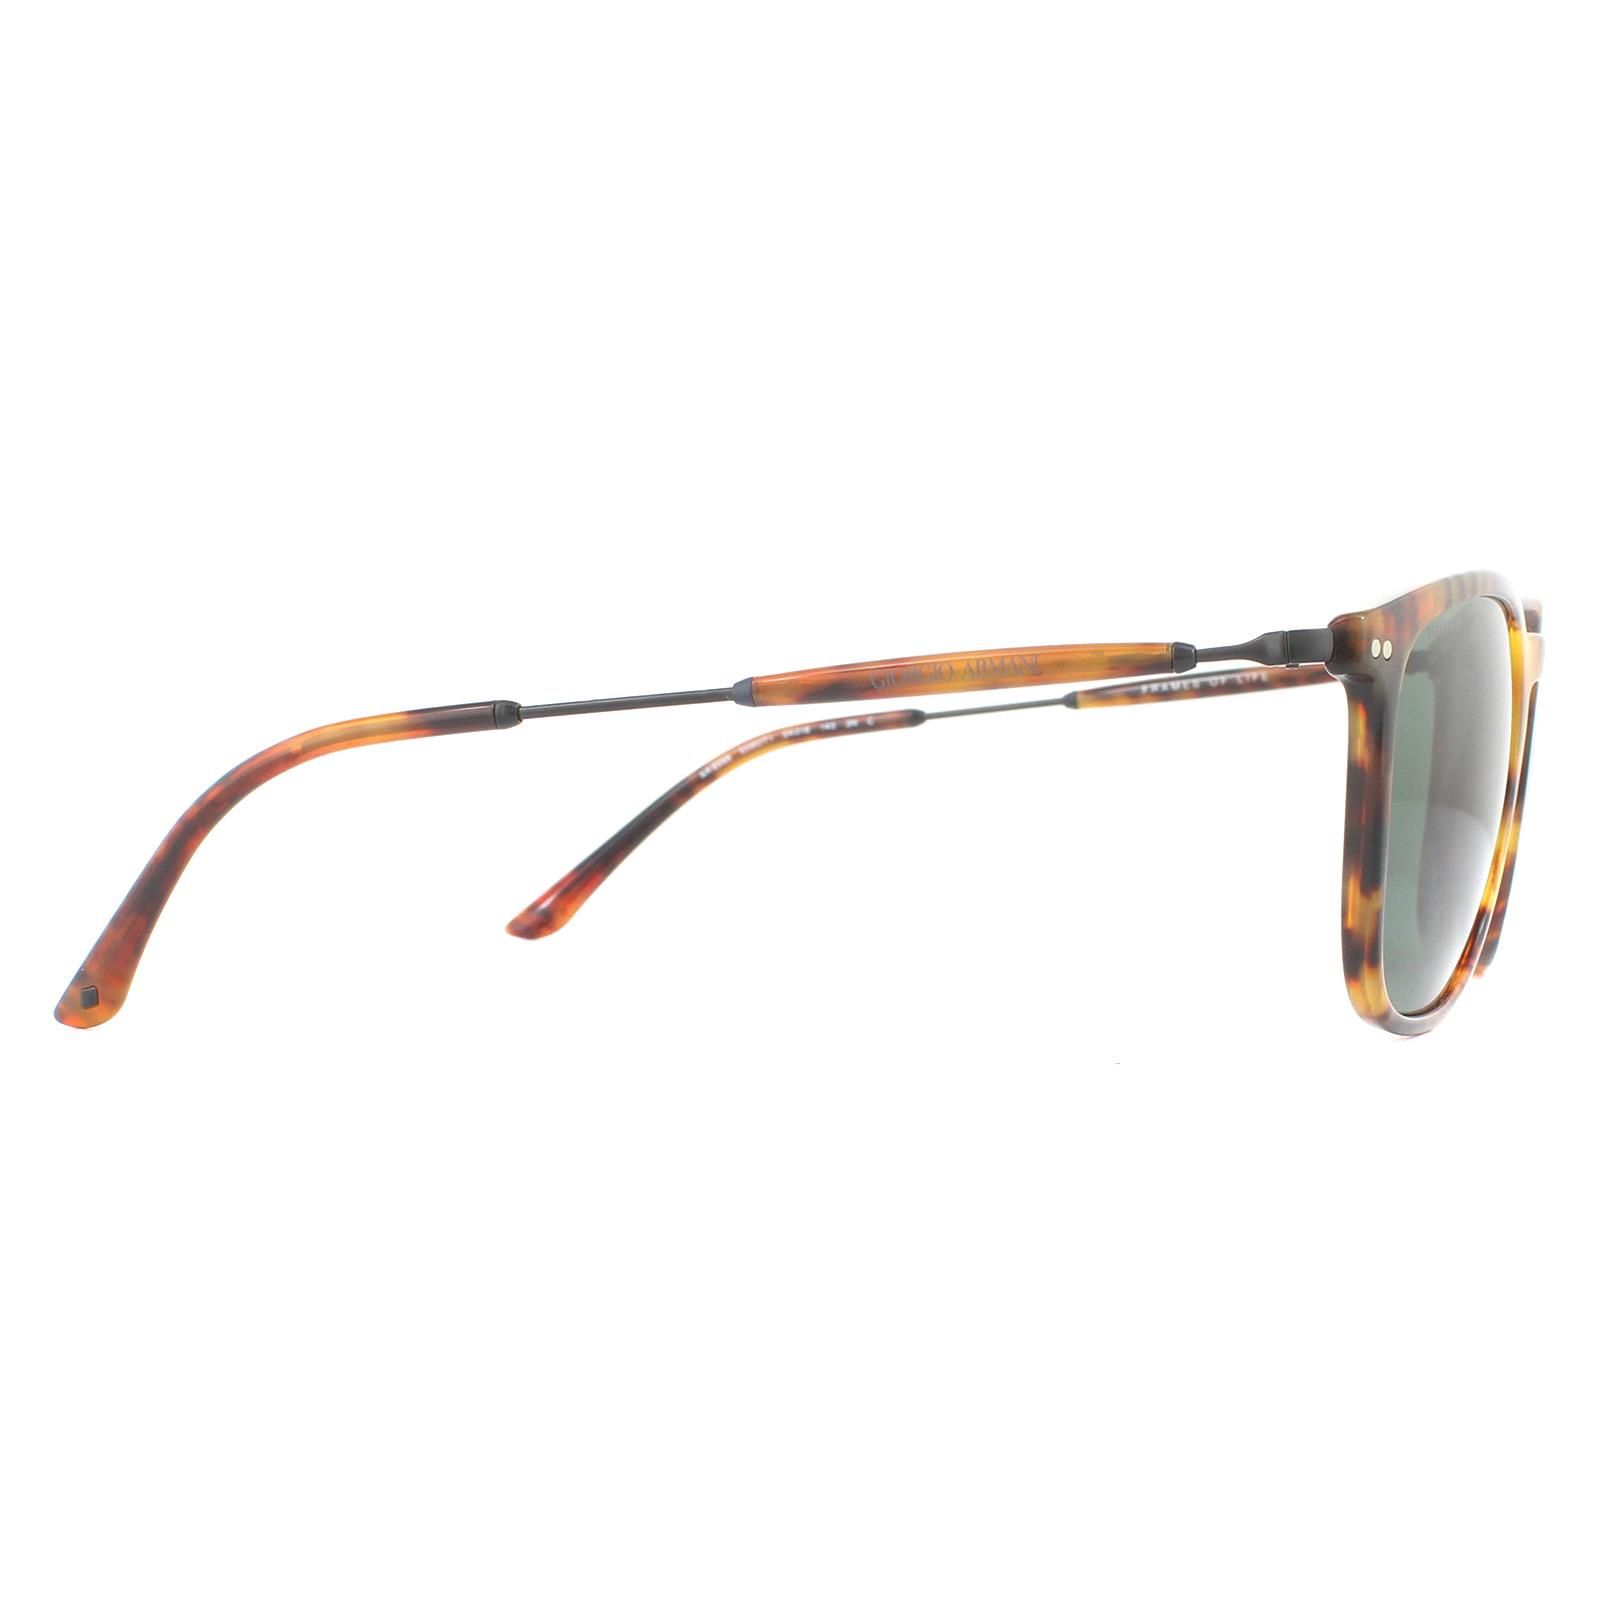 Giorgio Armani Sunglasses AR8098 559071 Yellow Havana Green are a cool lightweight acetate style with metal temple and some nice design touches from Giorgio Armani